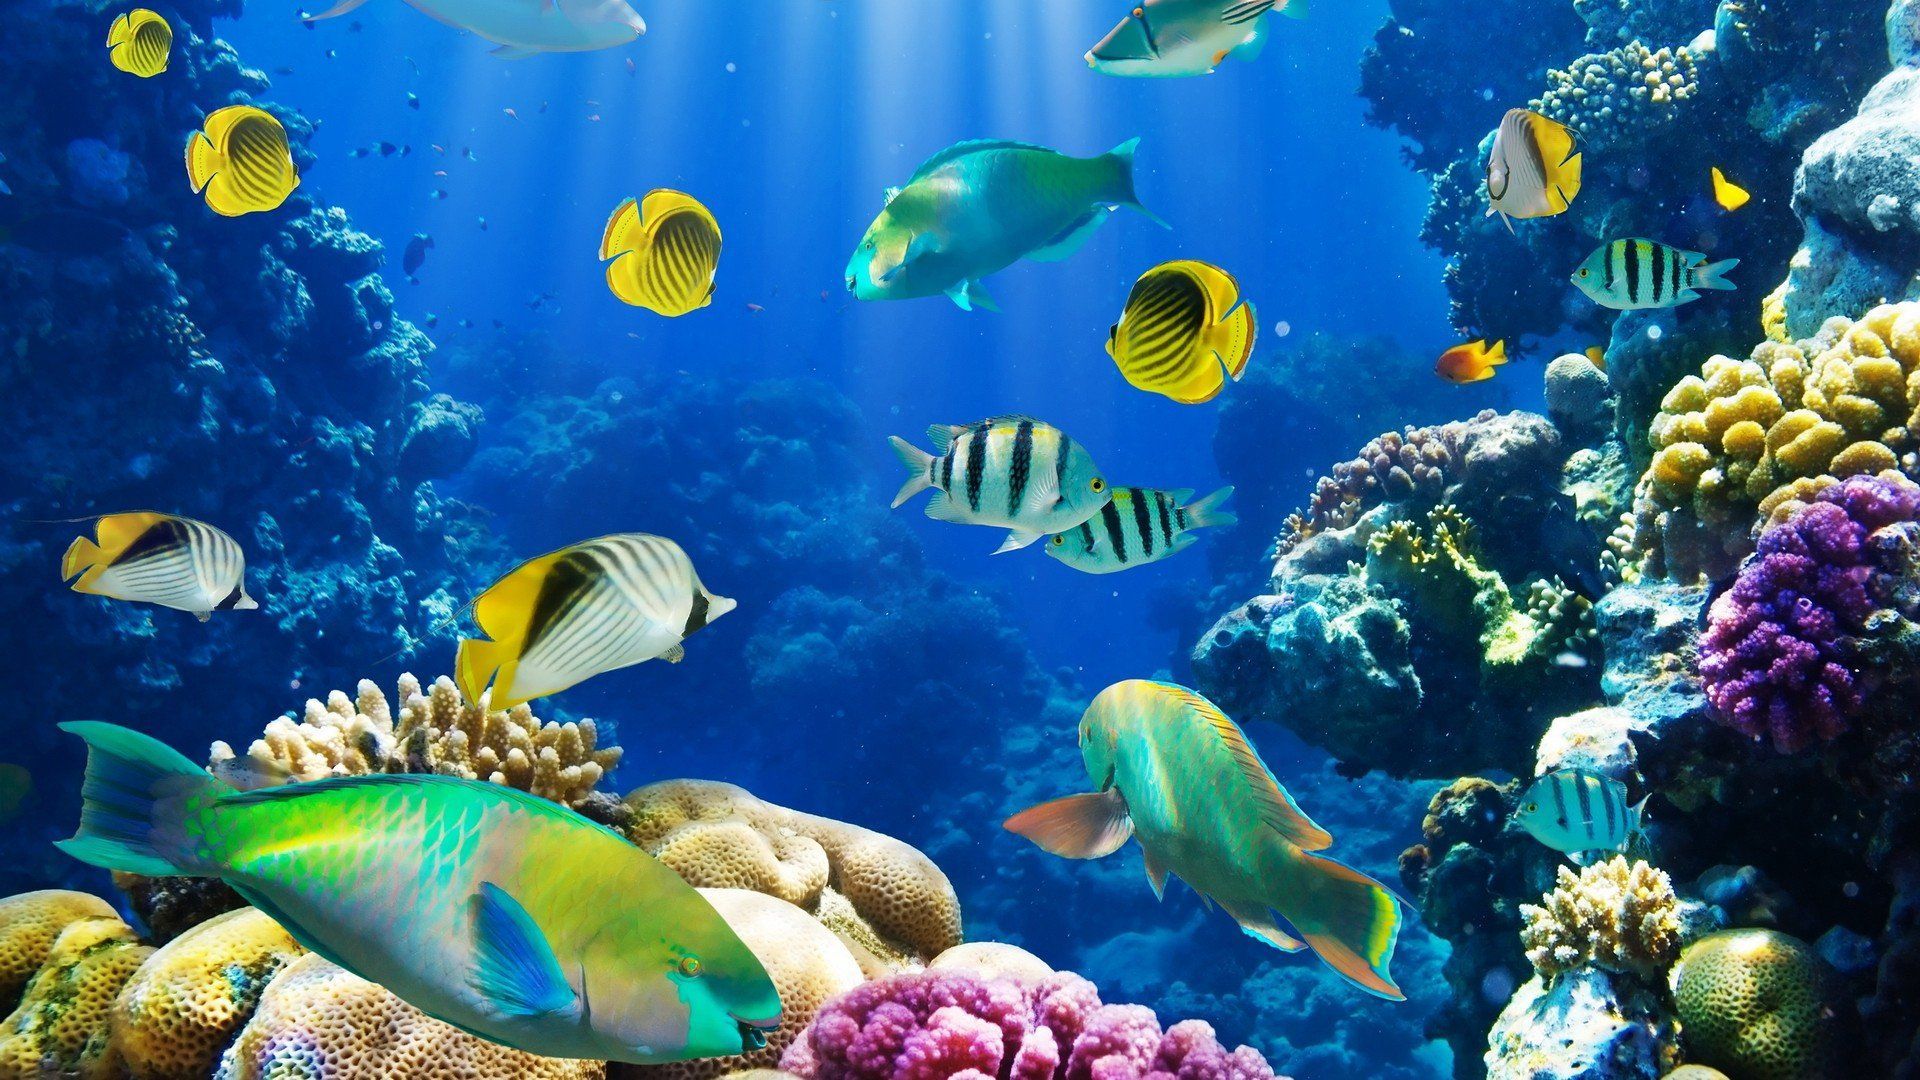 Beautiful Fishes In Water. Fish wallpaper, Fish background